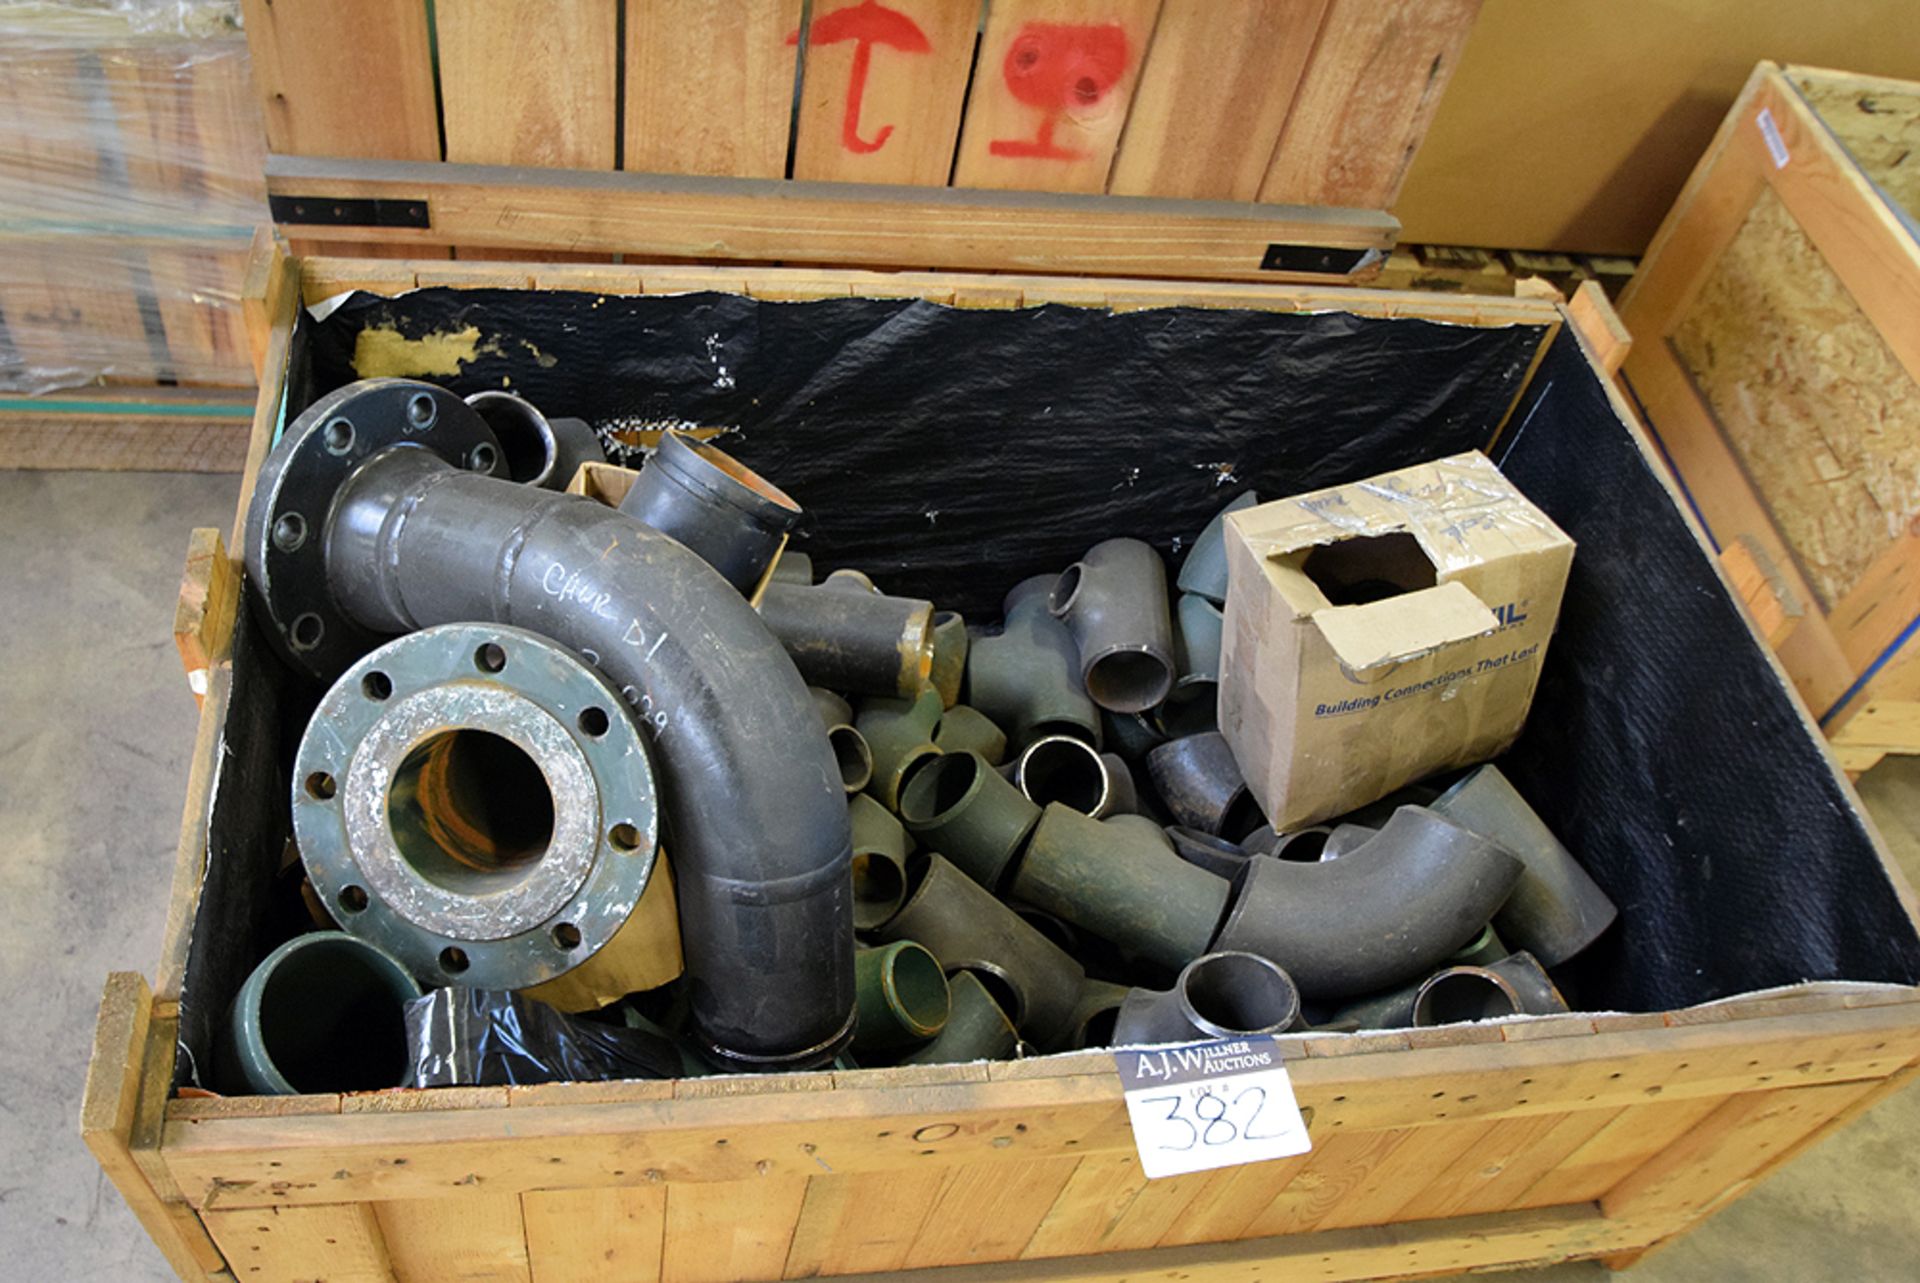 A Group of Black & Green Steel Buttweld Fittings & Flanges, 3" to 10" (on 6 pallets & Rolling Cart) - Image 8 of 8